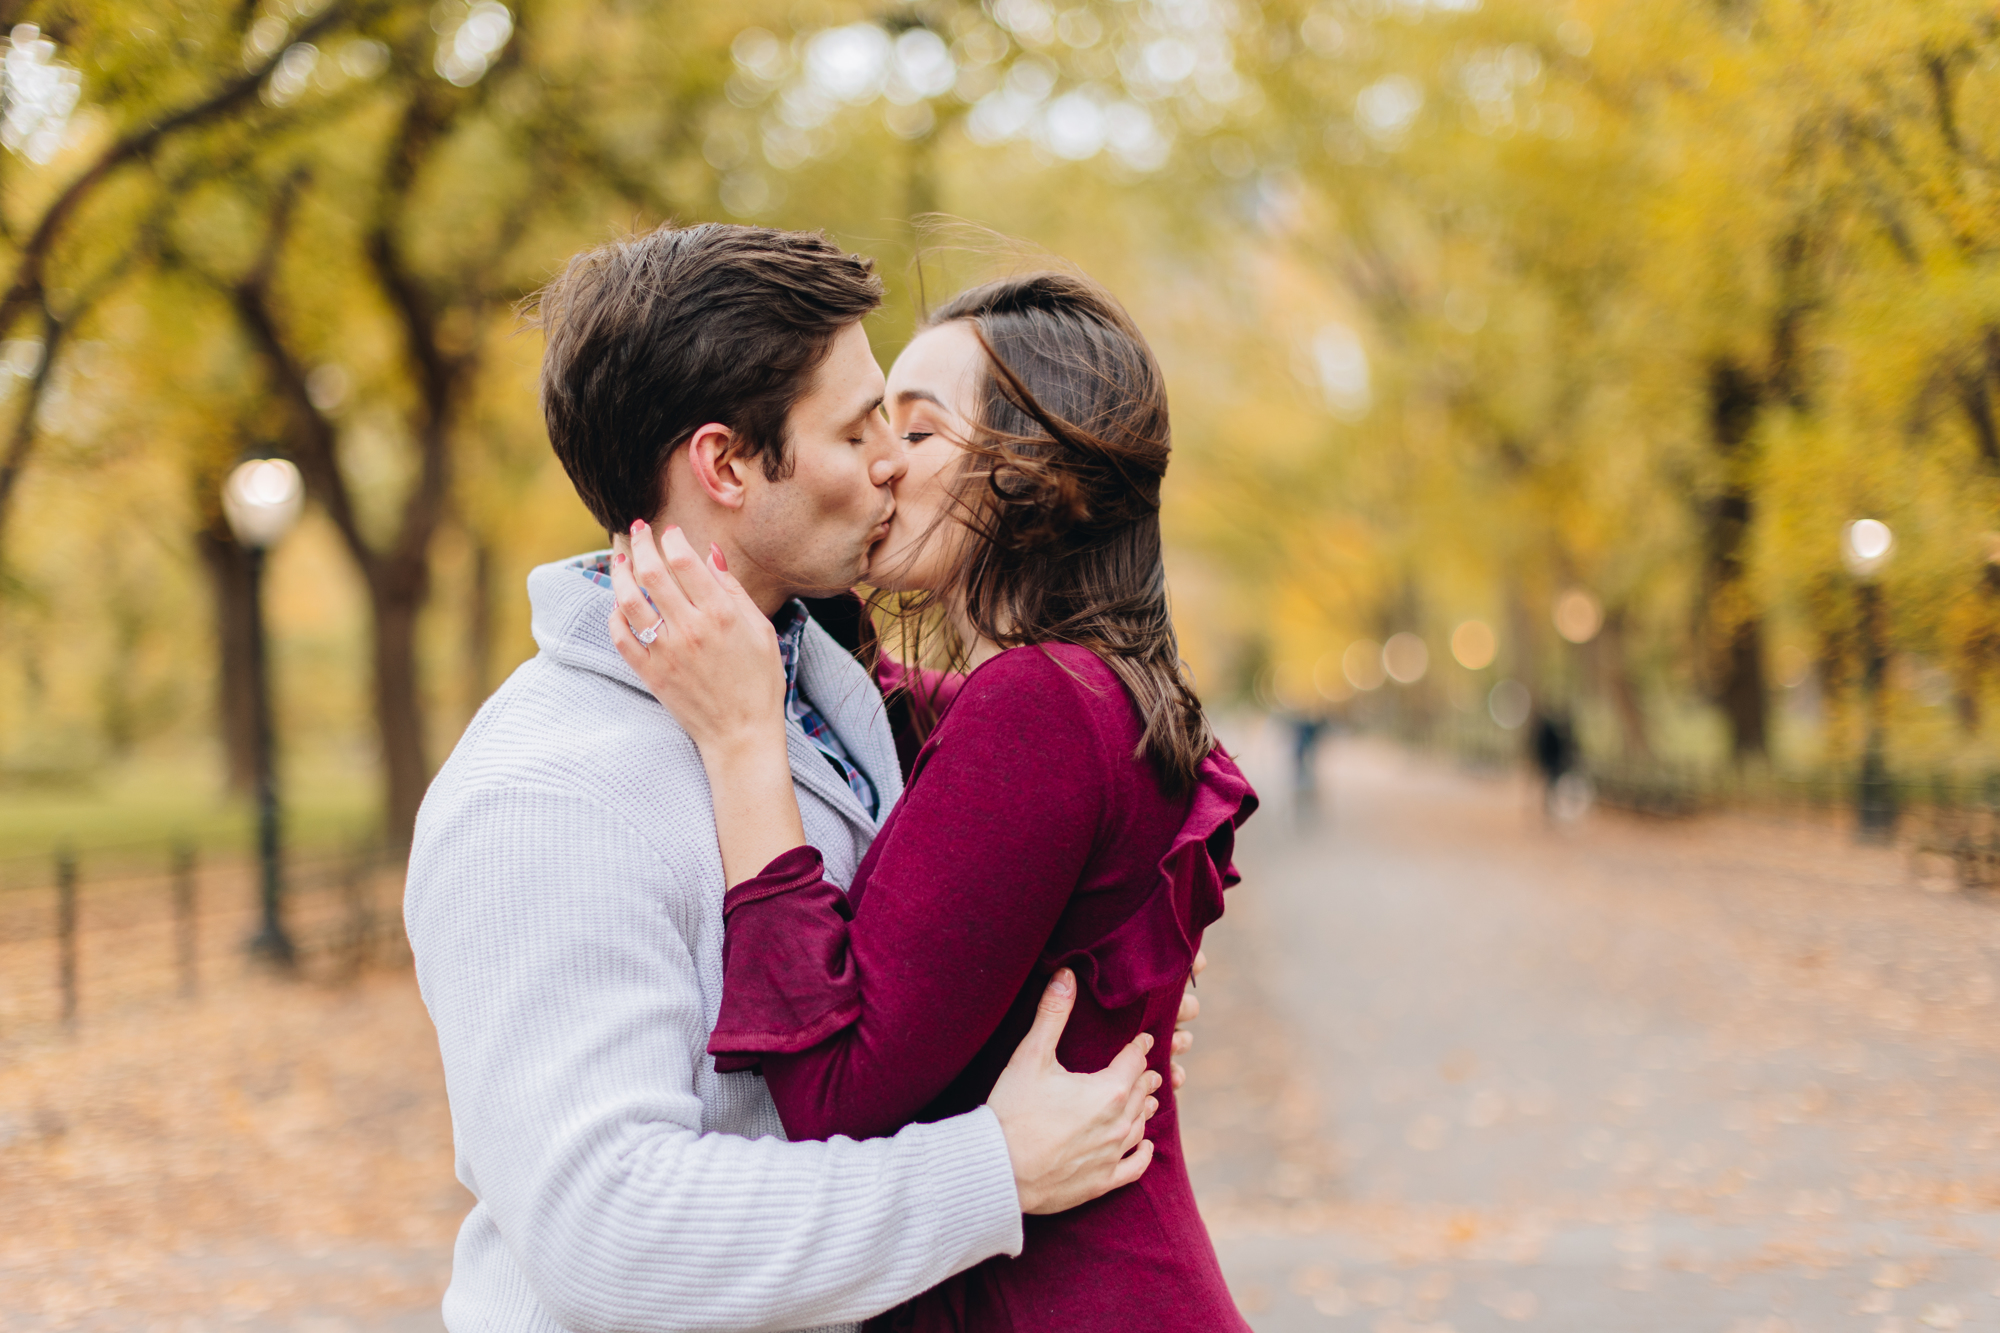 Picturesque Fall Engagement Photos in Central Park New York